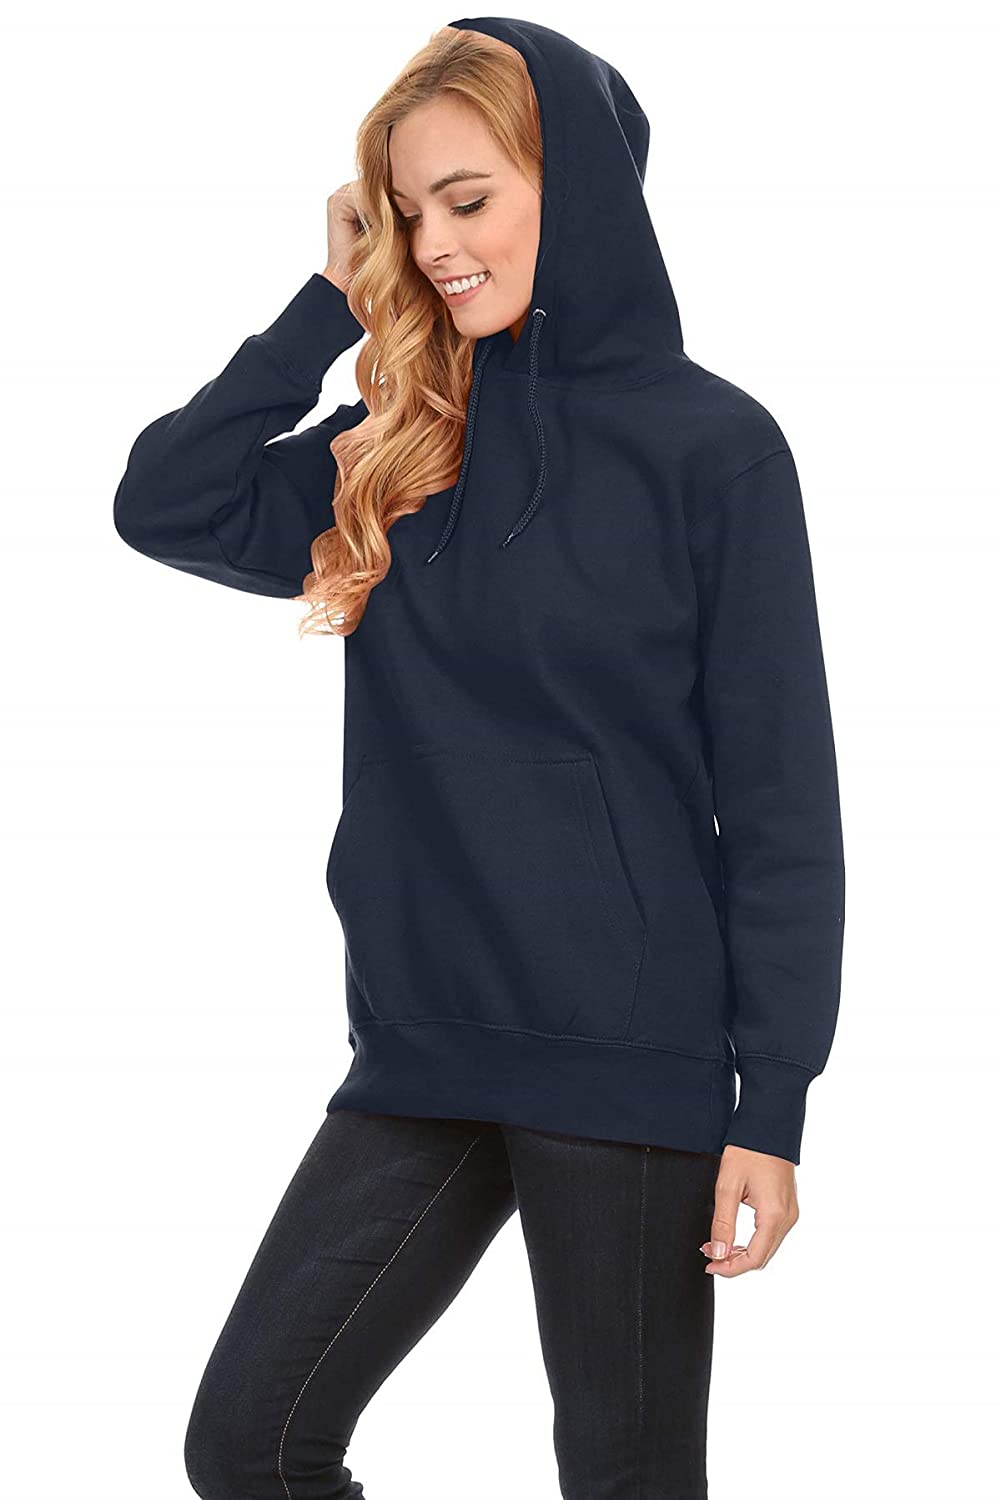 NavyBlue Hoodie For Women